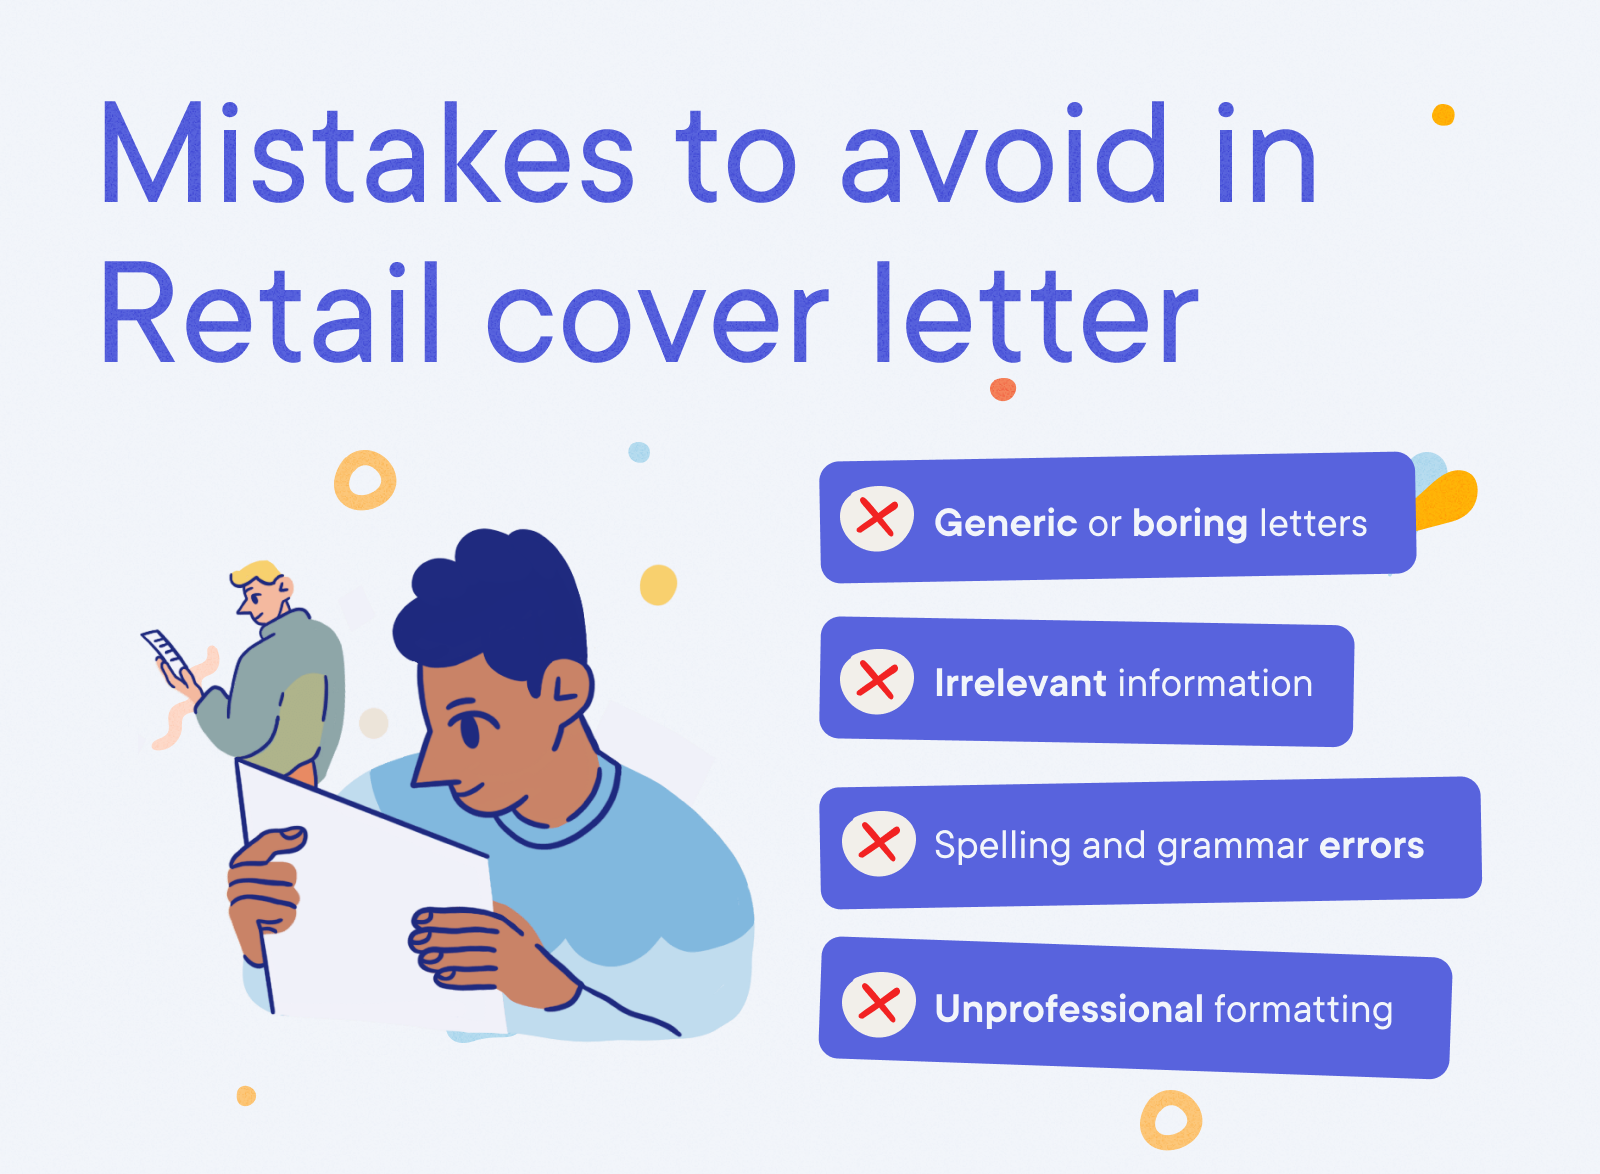 Retail Cover Letter Example - Mistakes to avoid in  Retail cover letter